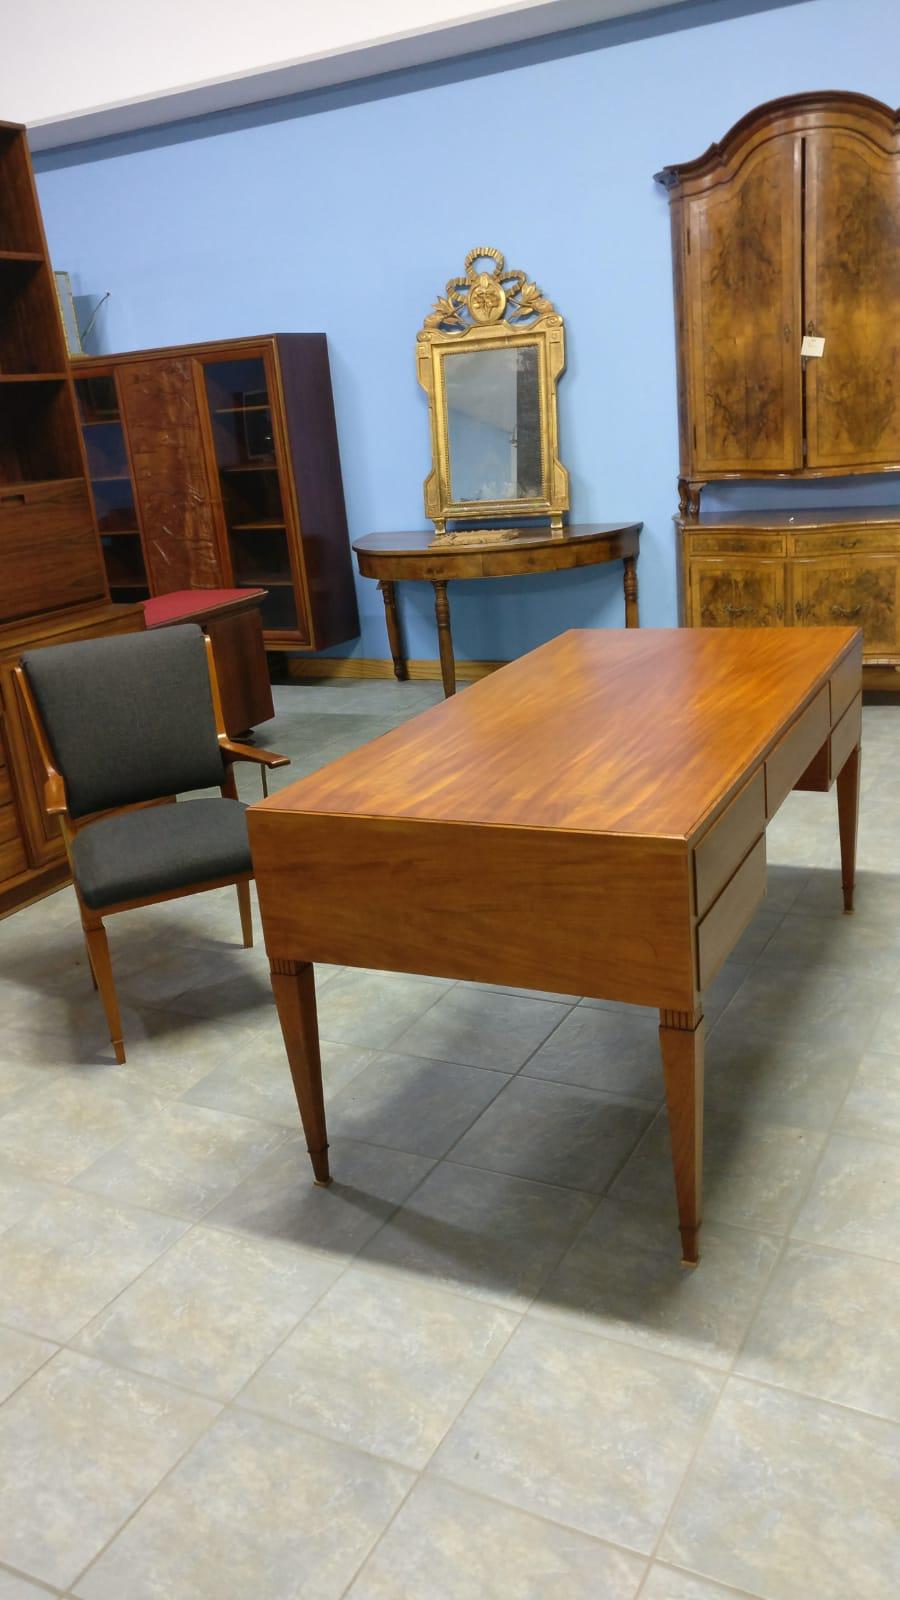 Contemporary Italian Midcentury Desk and Matching Chair, 1950s, Issel